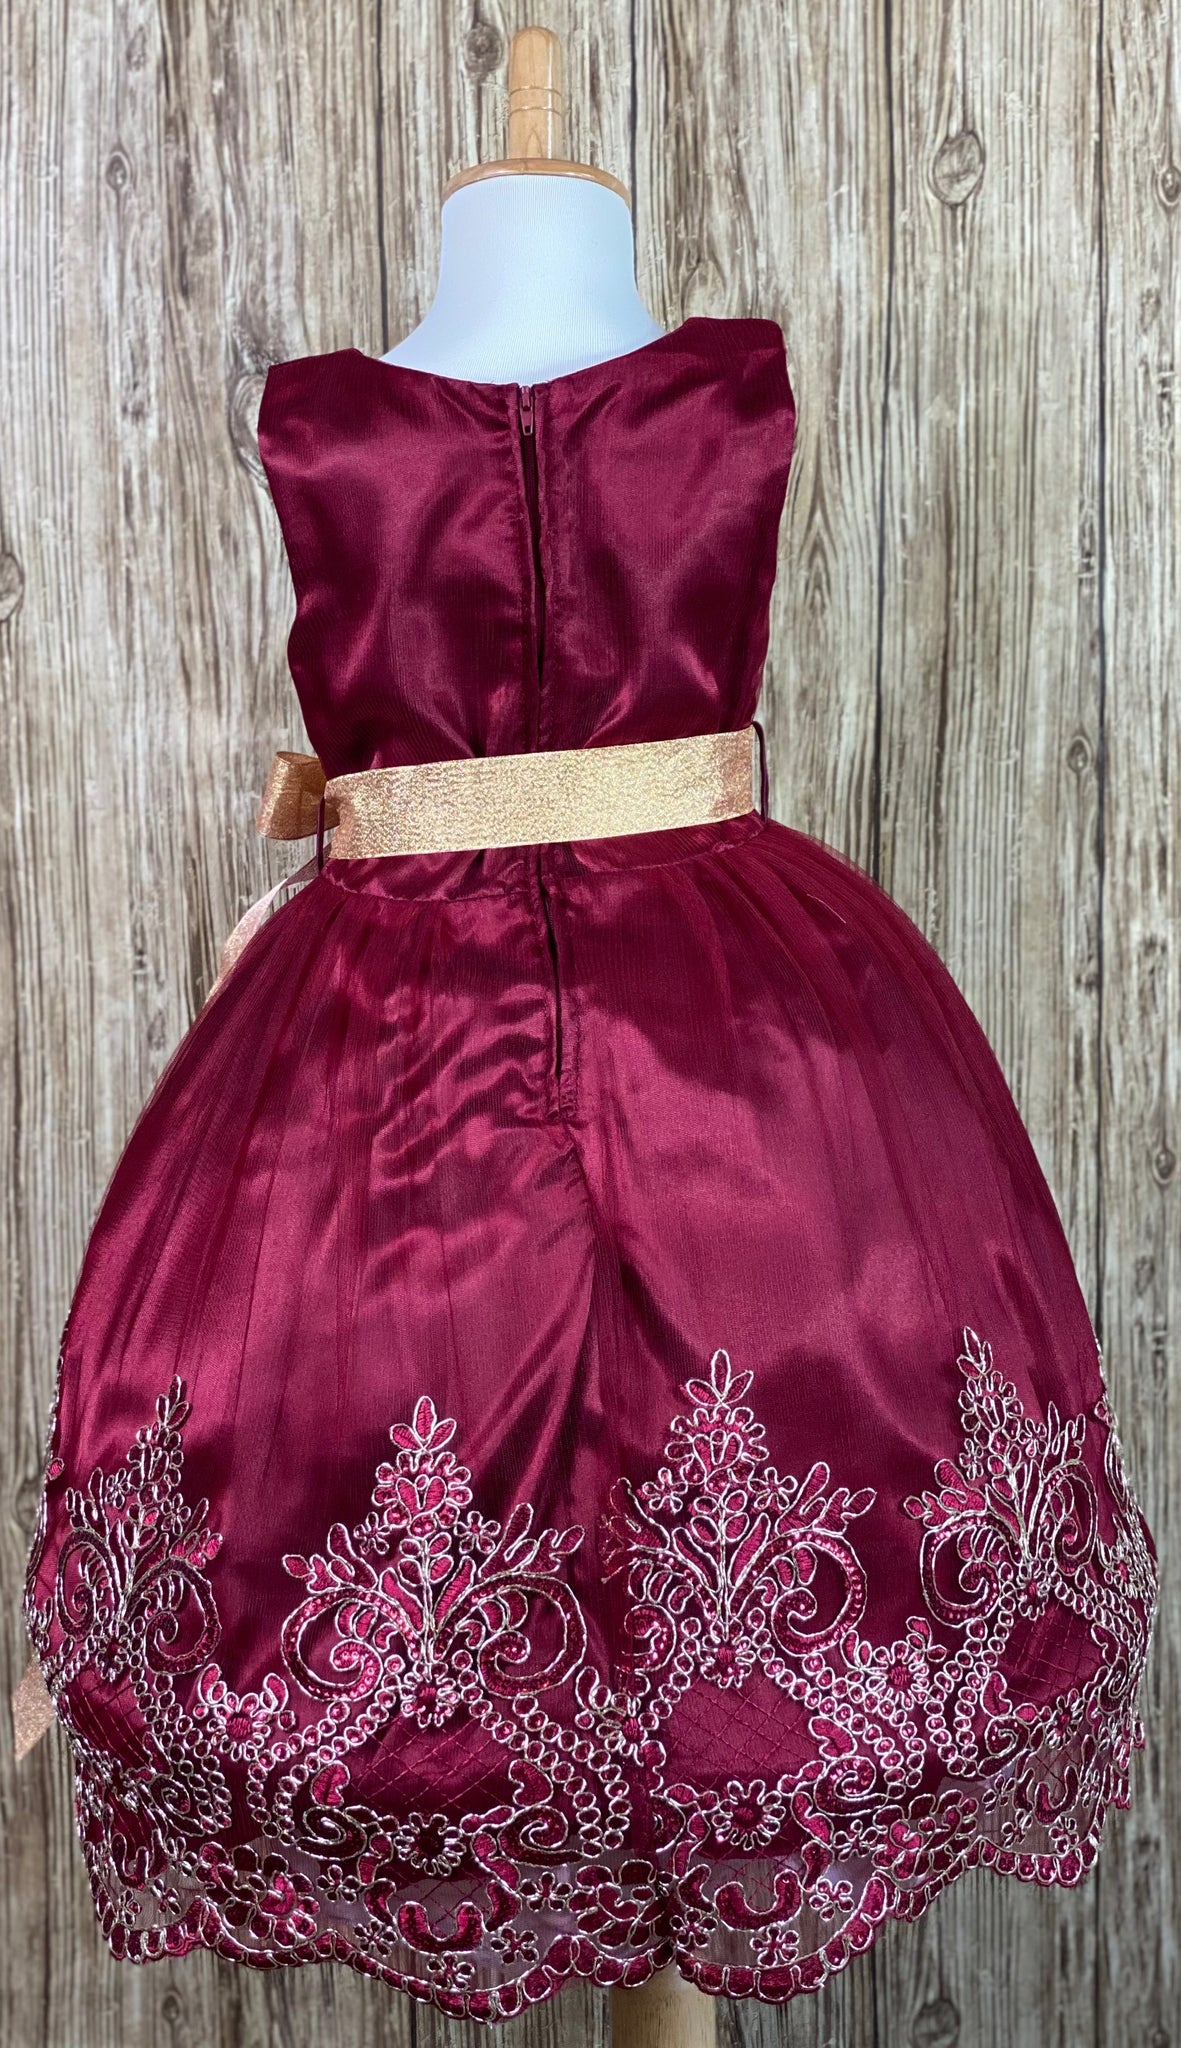 Burgundy satin bodice with tulle overlay Gold ribbon for bow in front or back Embroidered gold applique along edge of skirting Zipper closure Dress pictured with a petticoat Petticoat not included  Choose from a tulle, cloth, or wire for best look